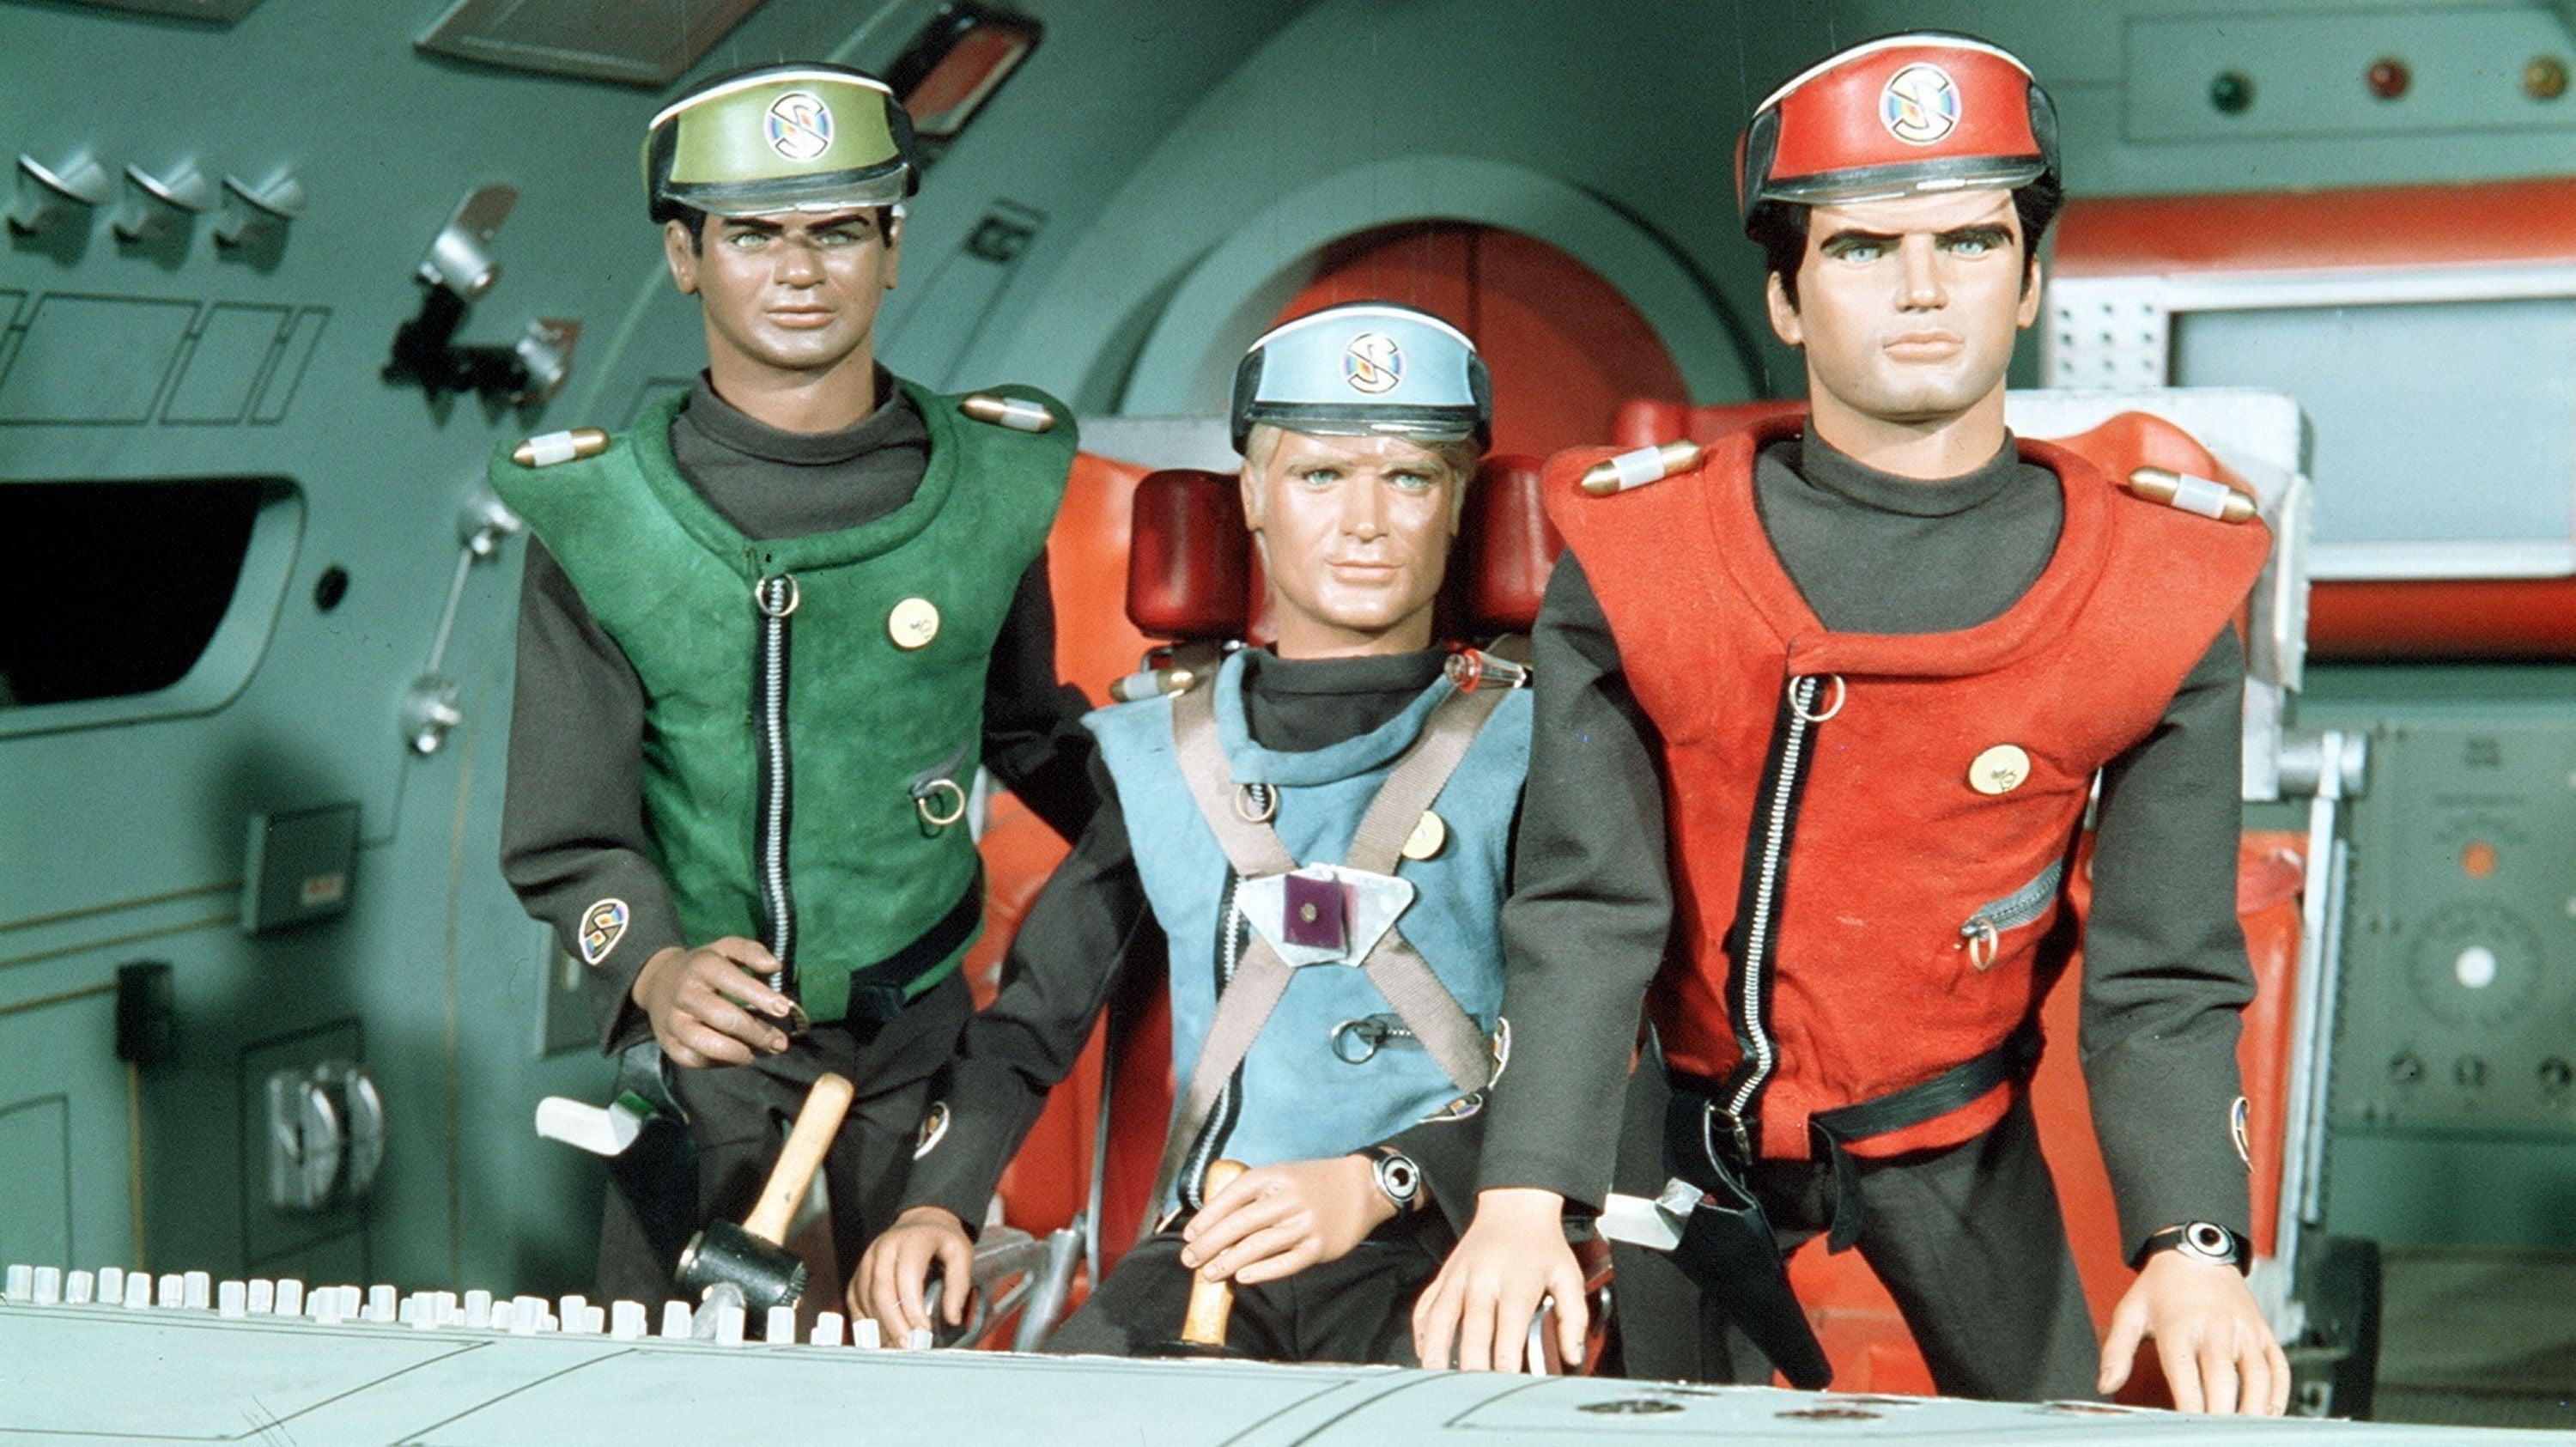 Captain Scarlet and the Mysterons backdrop